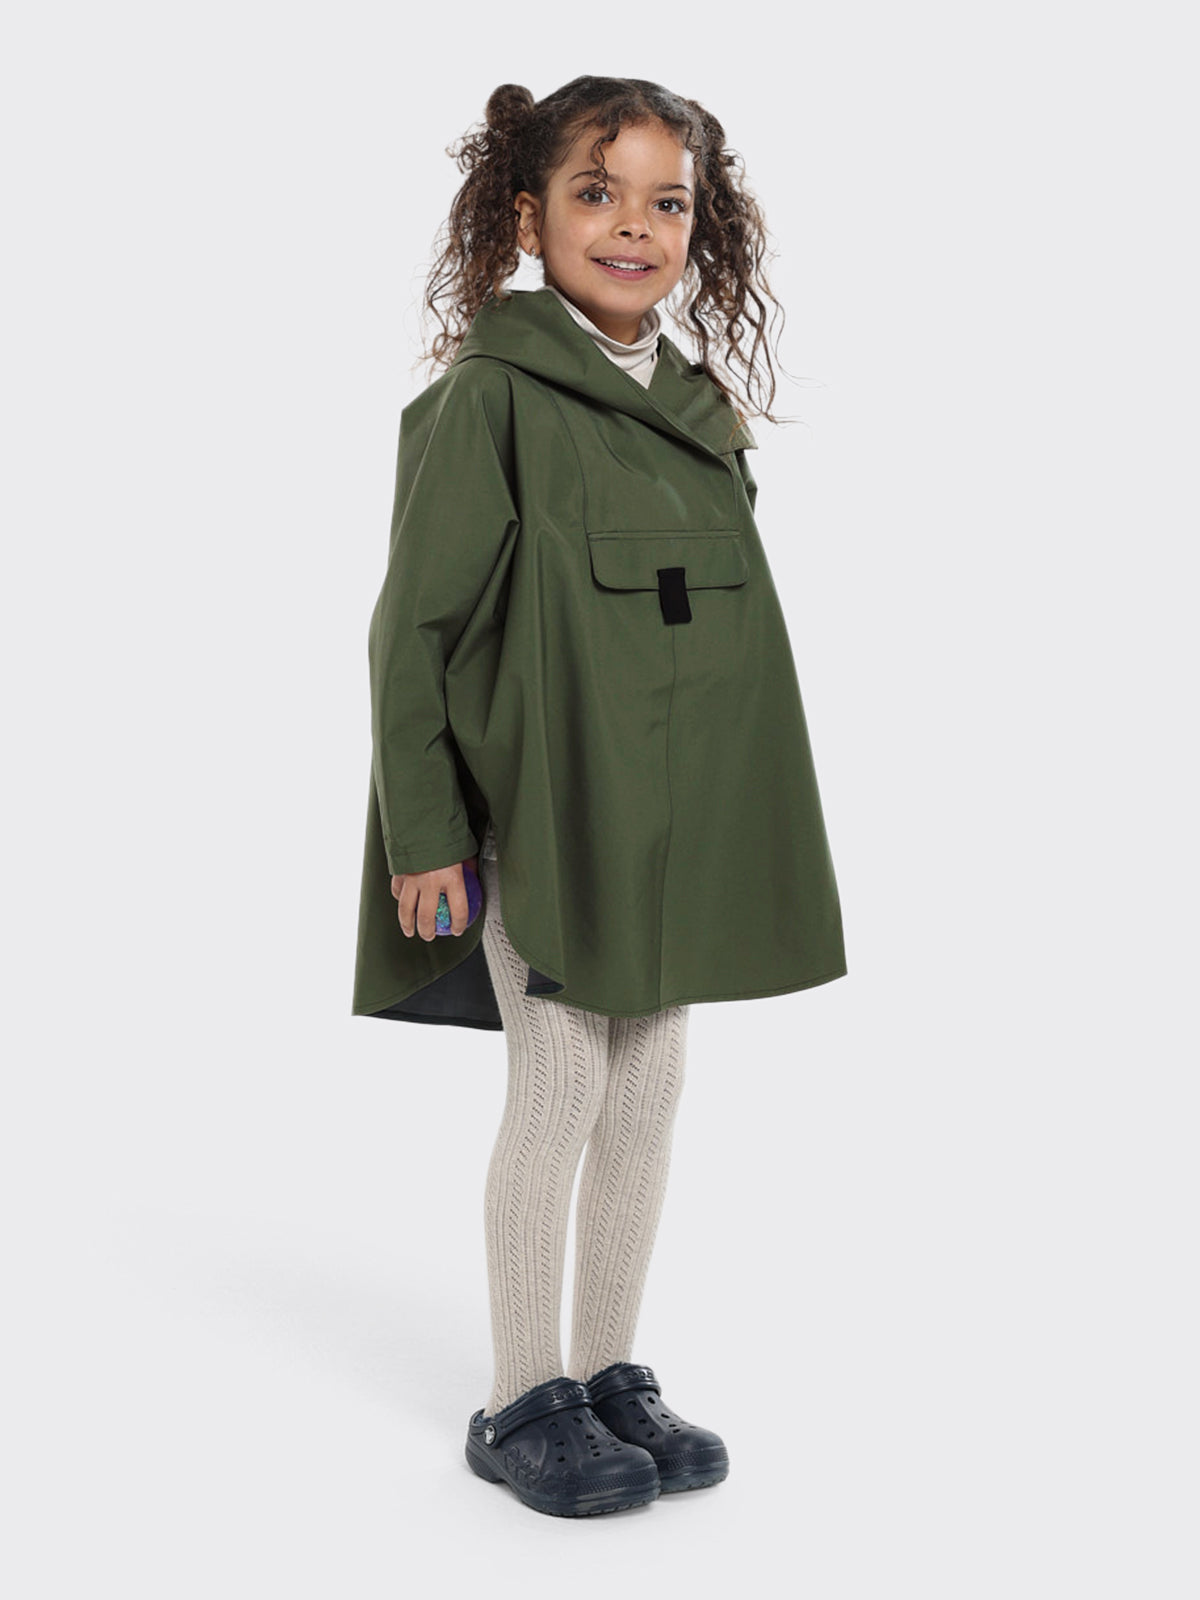 Kid wearing Bergen mini poncho by Blæst in the color Dusty Green